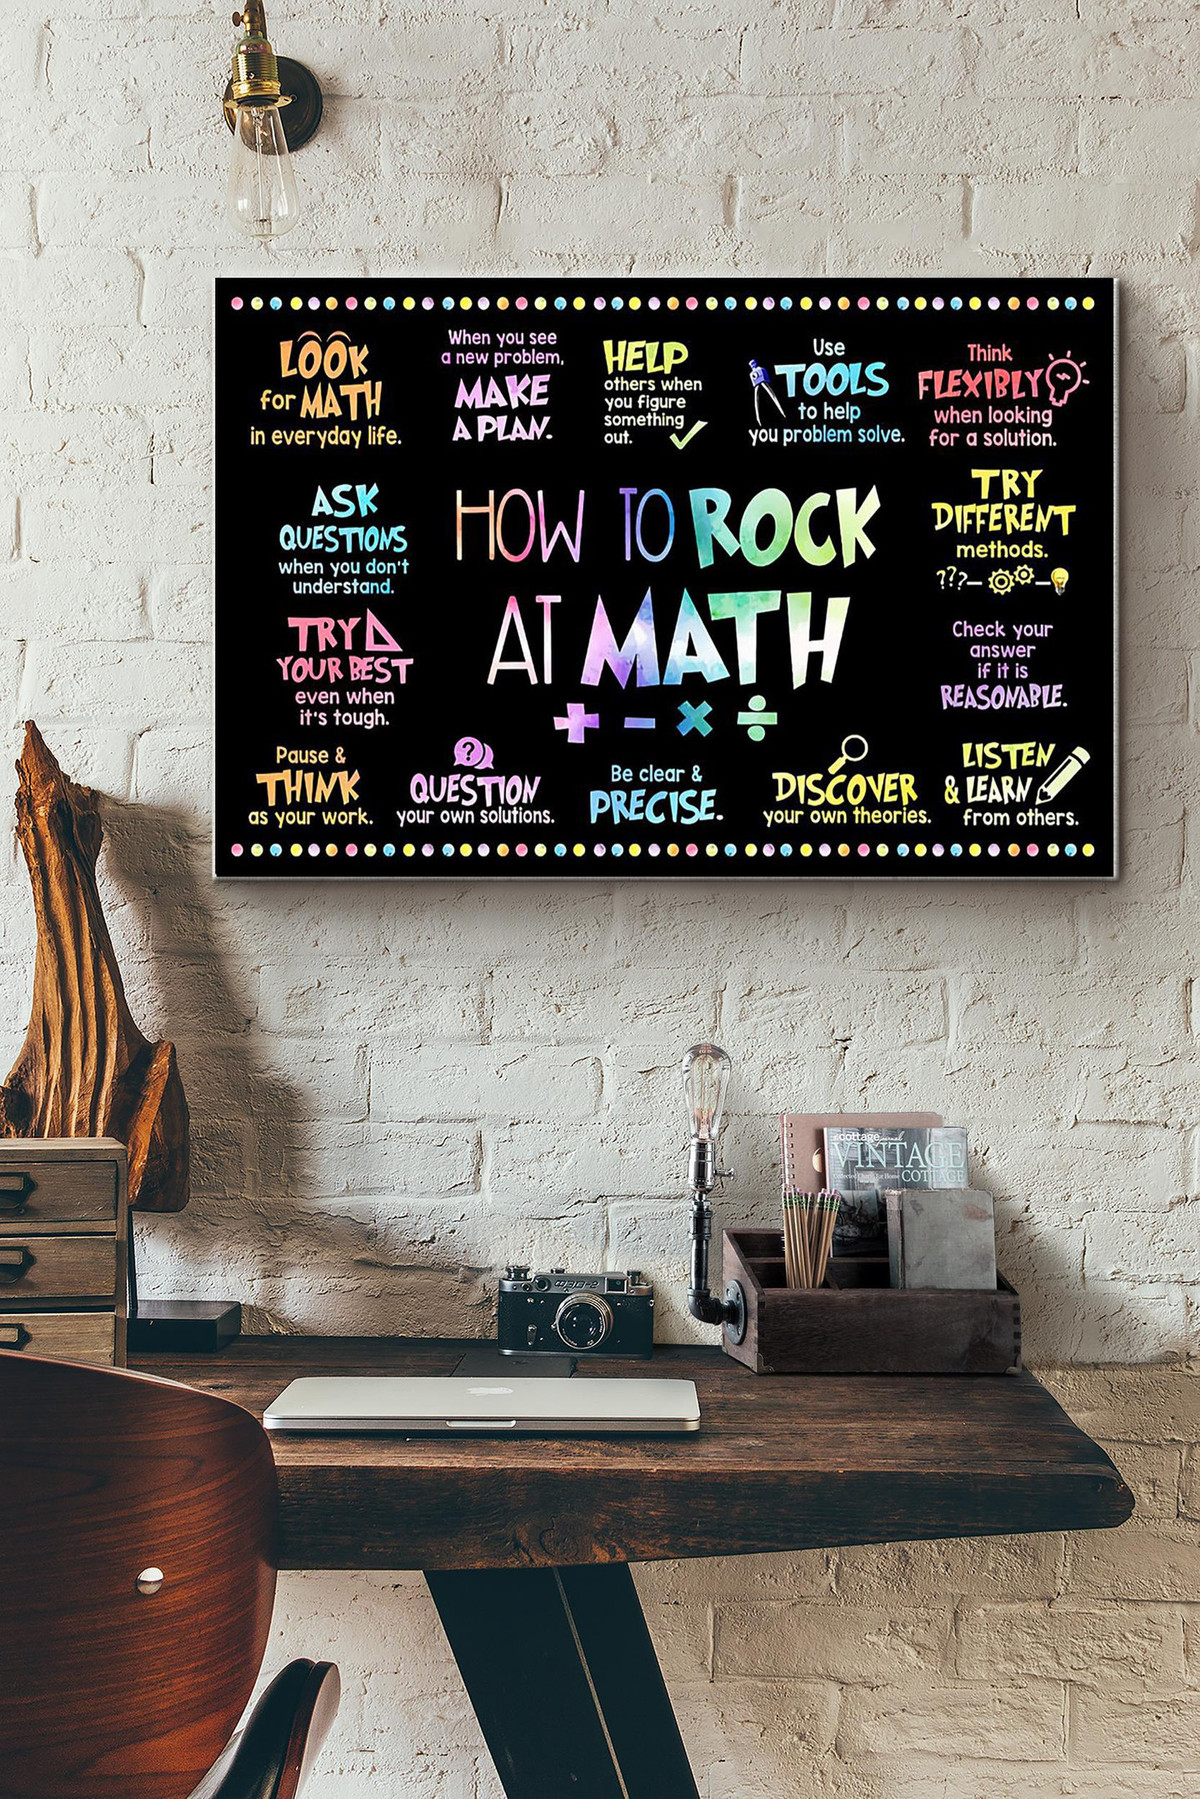 How To Rock At Math Fourteen Tips At Math Canvas Painting Ideas, Canvas Hanging Prints, Gift Idea Framed Prints, Canvas Paintings Wrapped Canvas 8x10